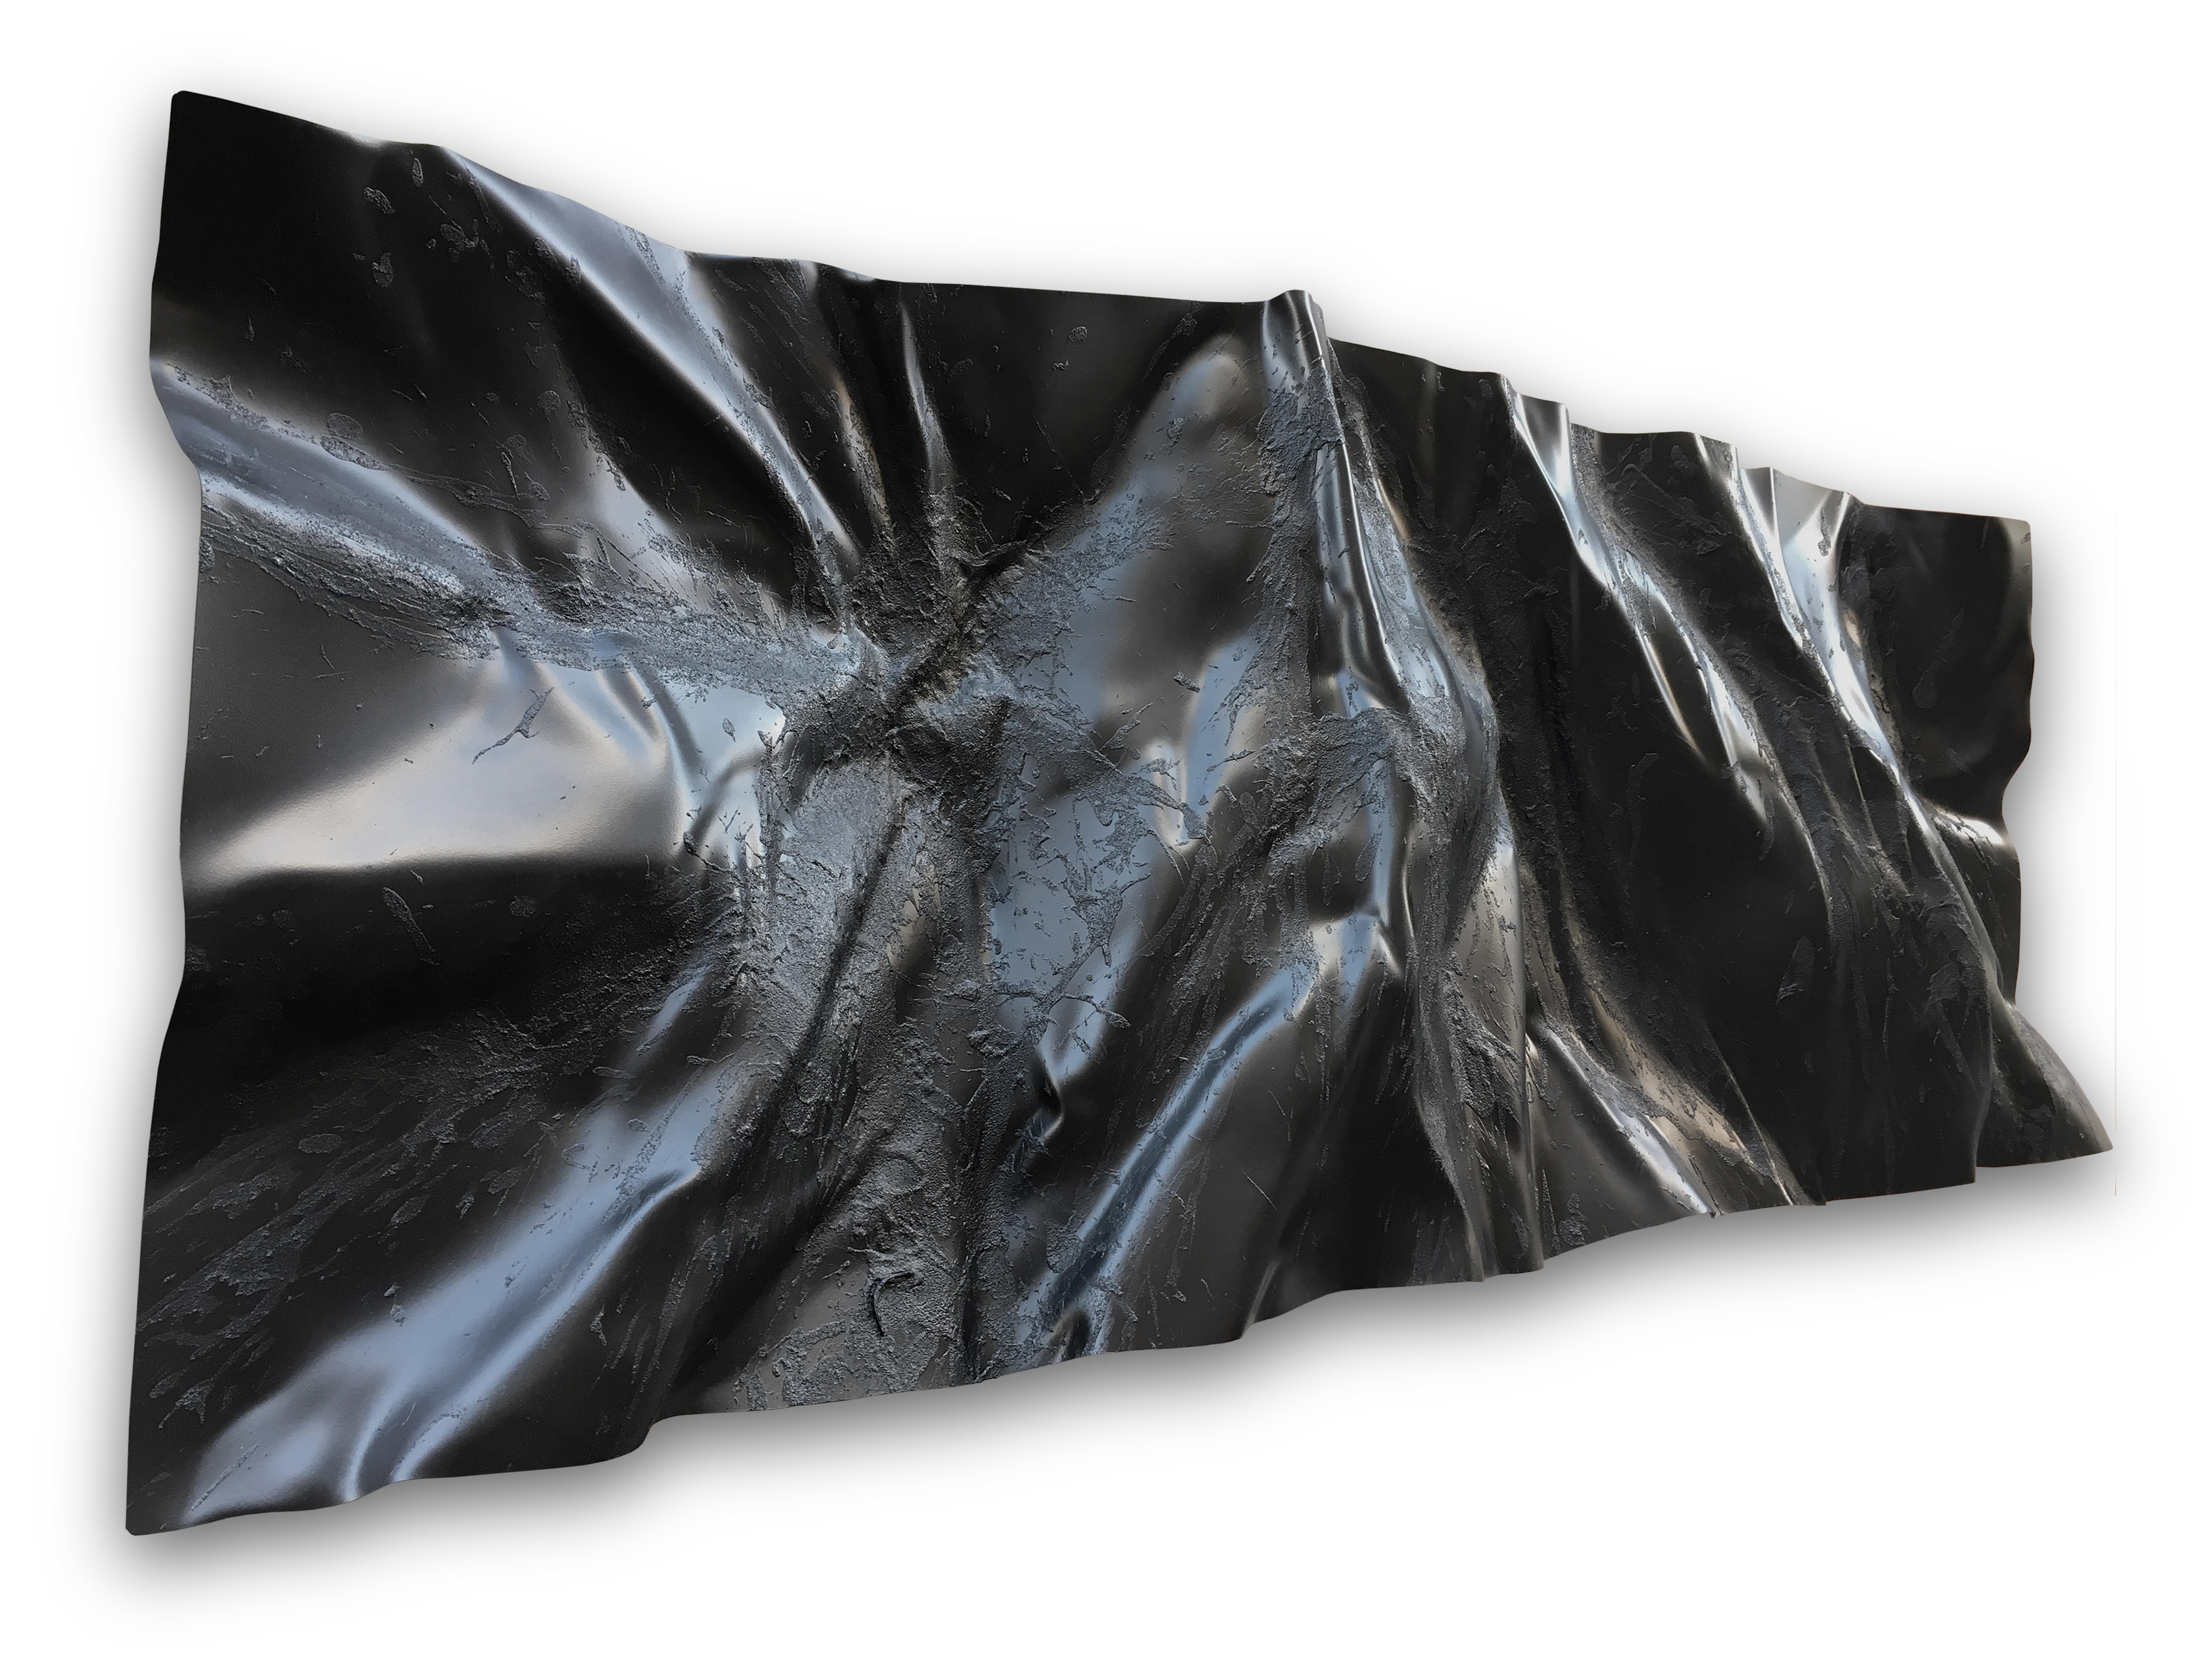 Mantle Series (Black) - Sculpture by Mareo Rodriguez